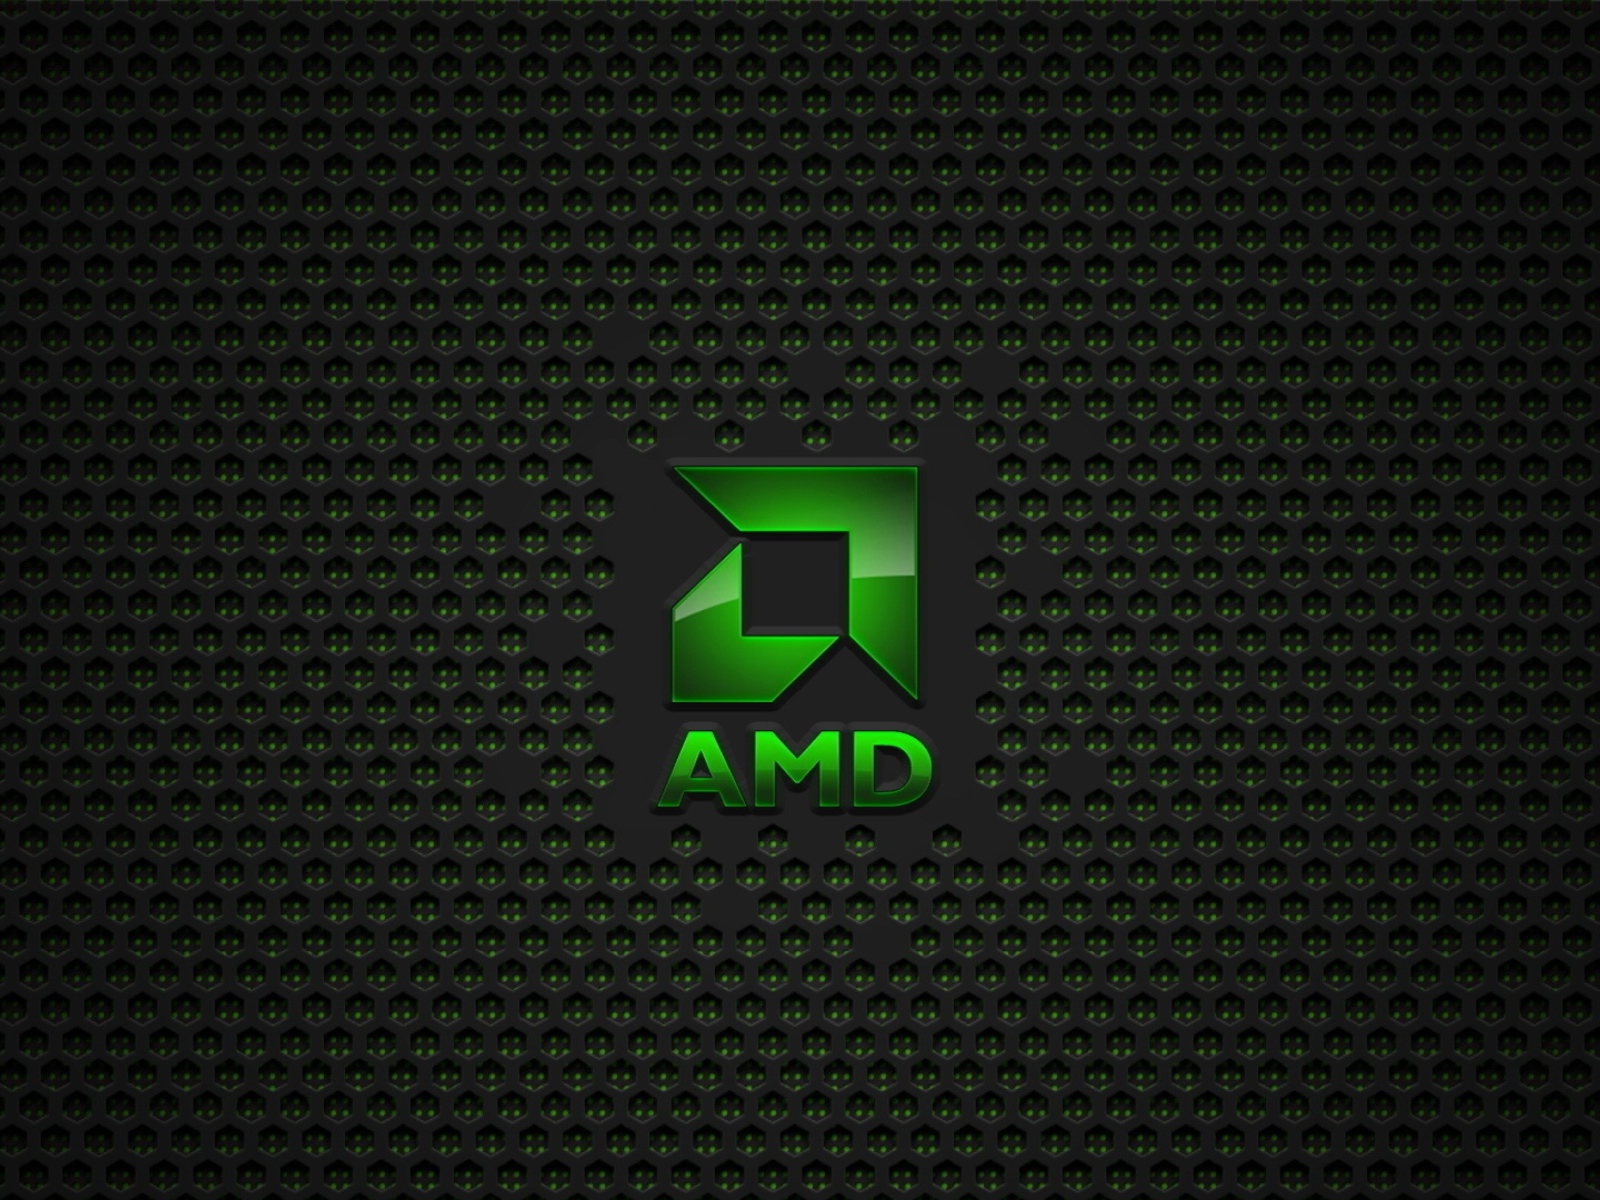 AMD green icon on a mesh background